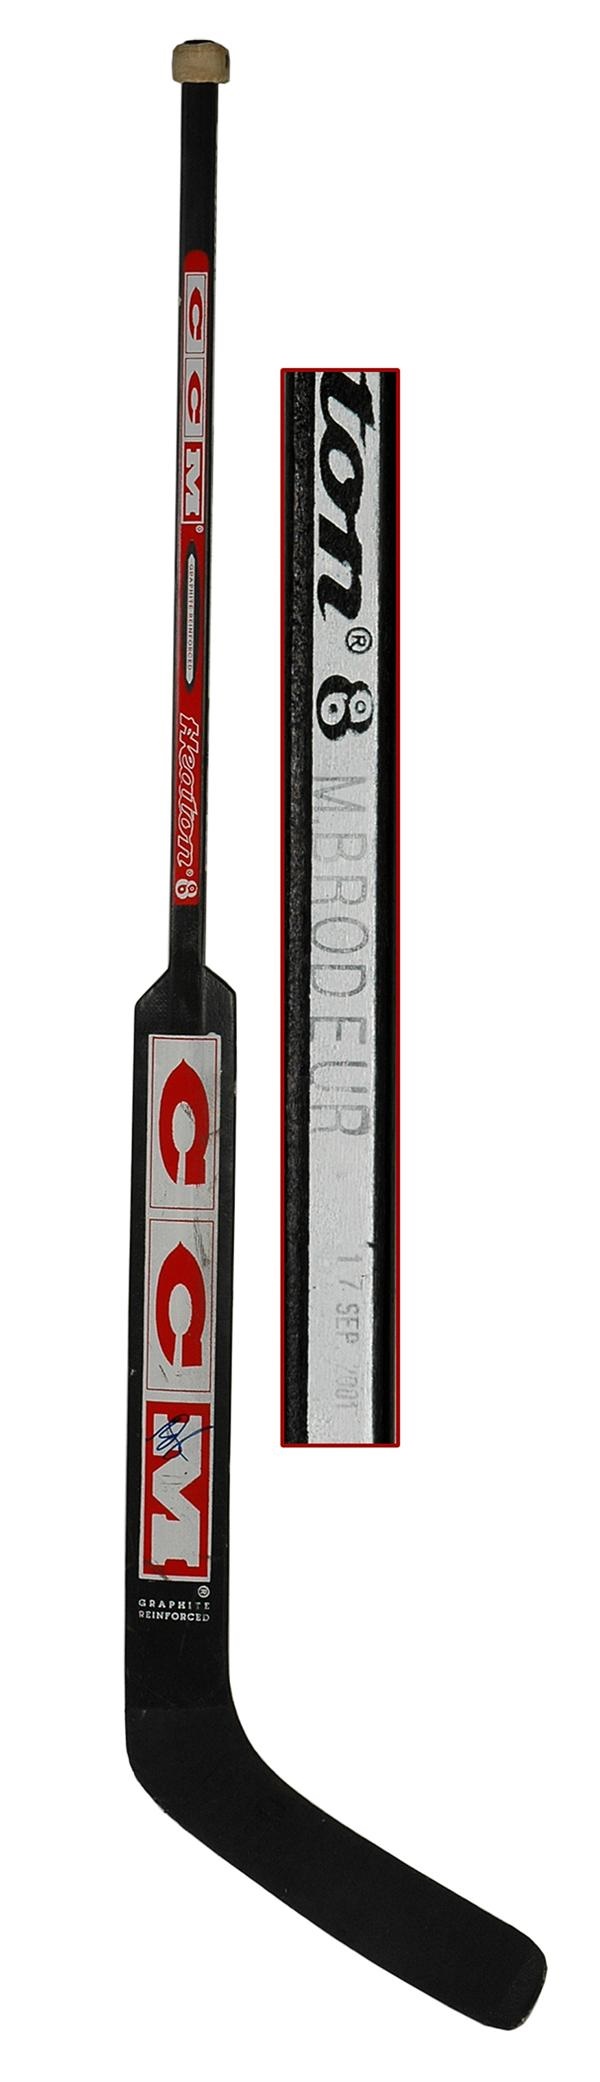 Hockey Equipment - 2001 Martin Brodeur Autographed Game Used Stick